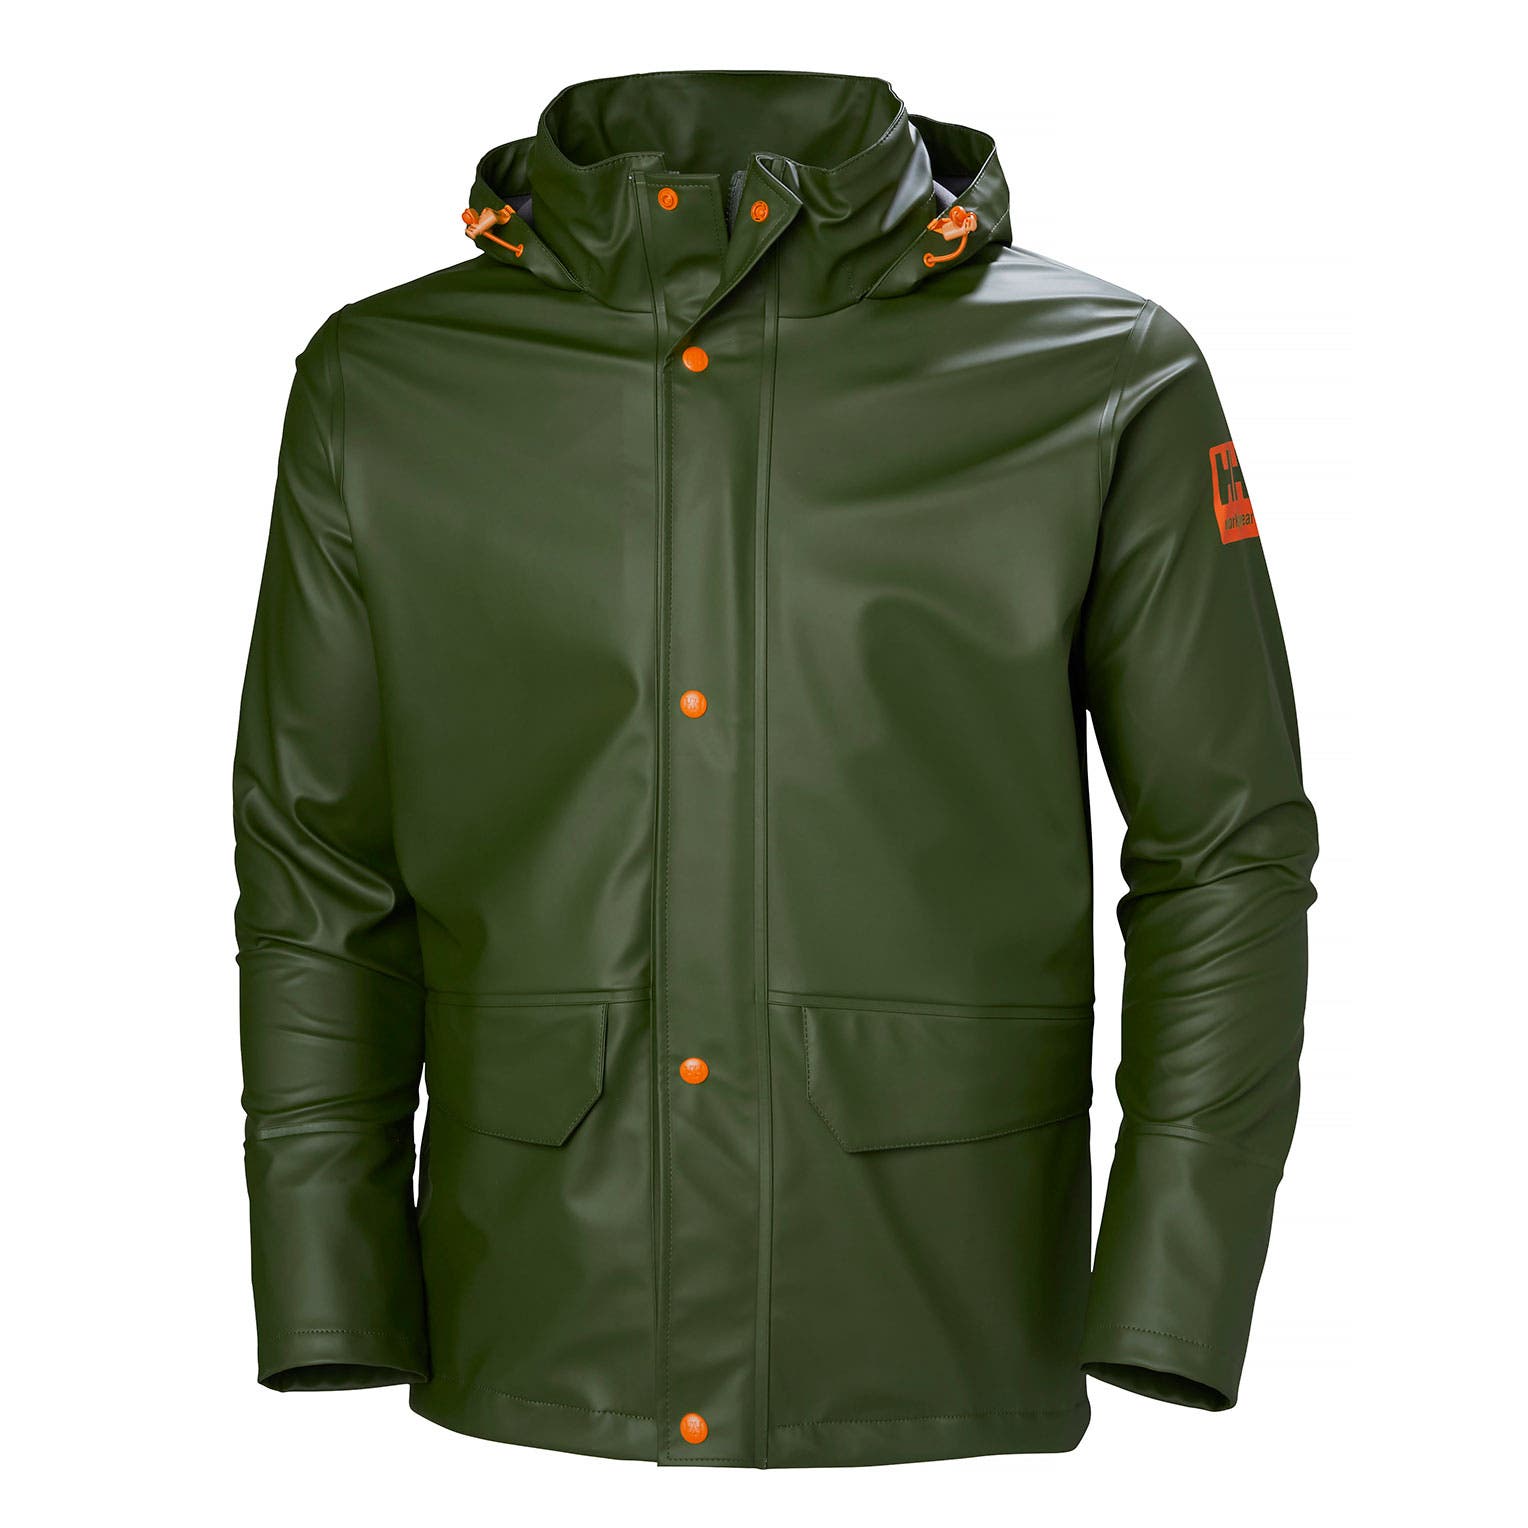 Helly Hansen Men's Gale Rain Jacket in Army Green from the front